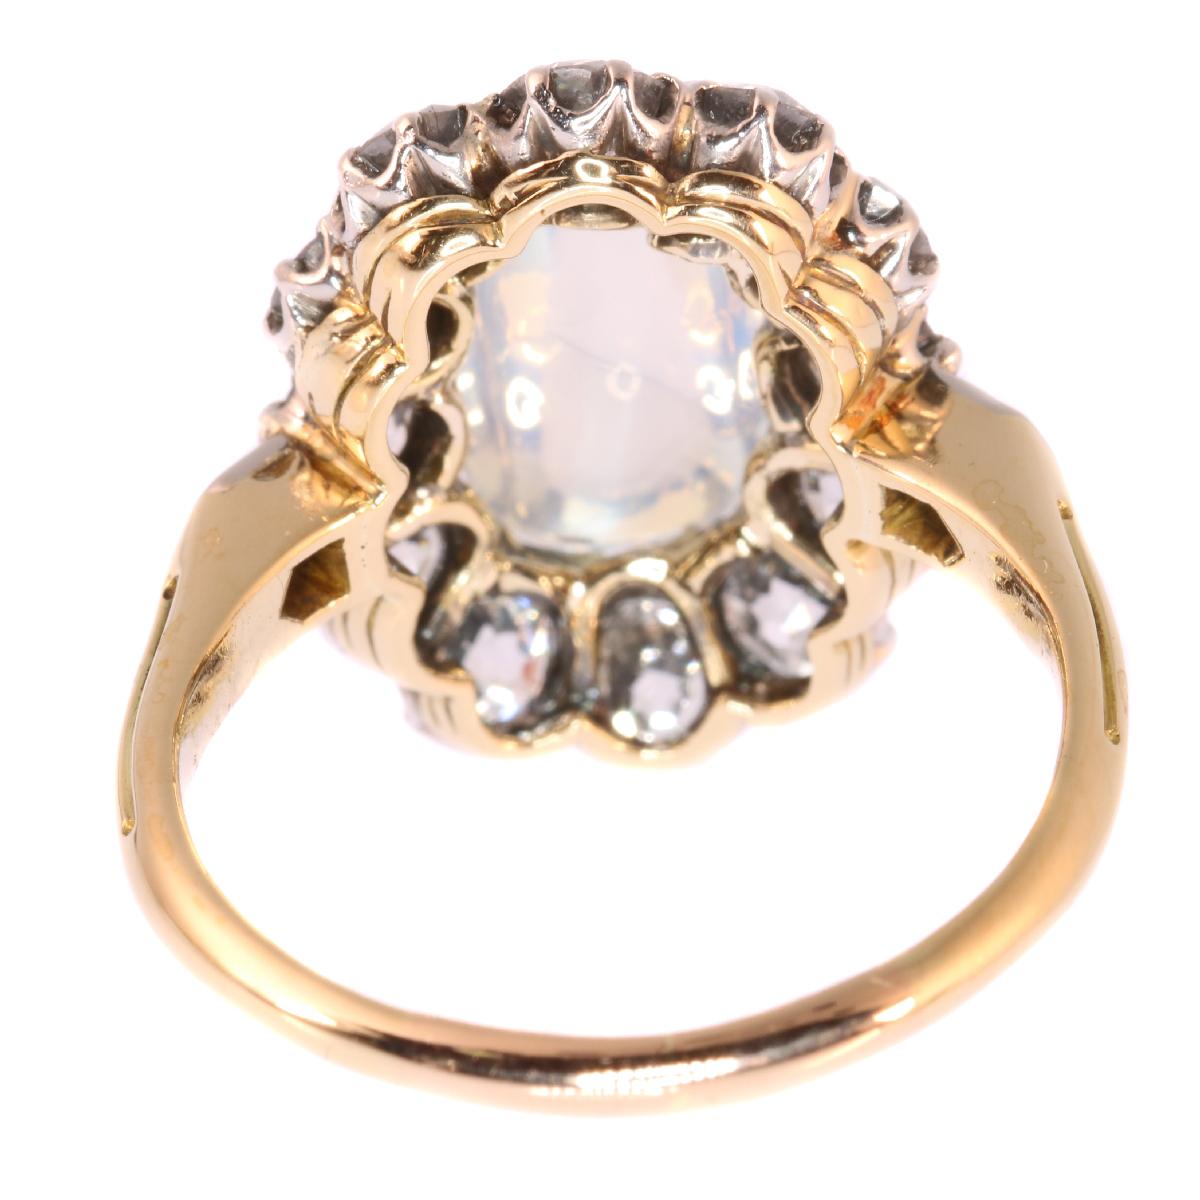 Late Victorian Bluish Moonstone '4.20 Carat' and Diamond '2.16' Carat Ring For Sale 4